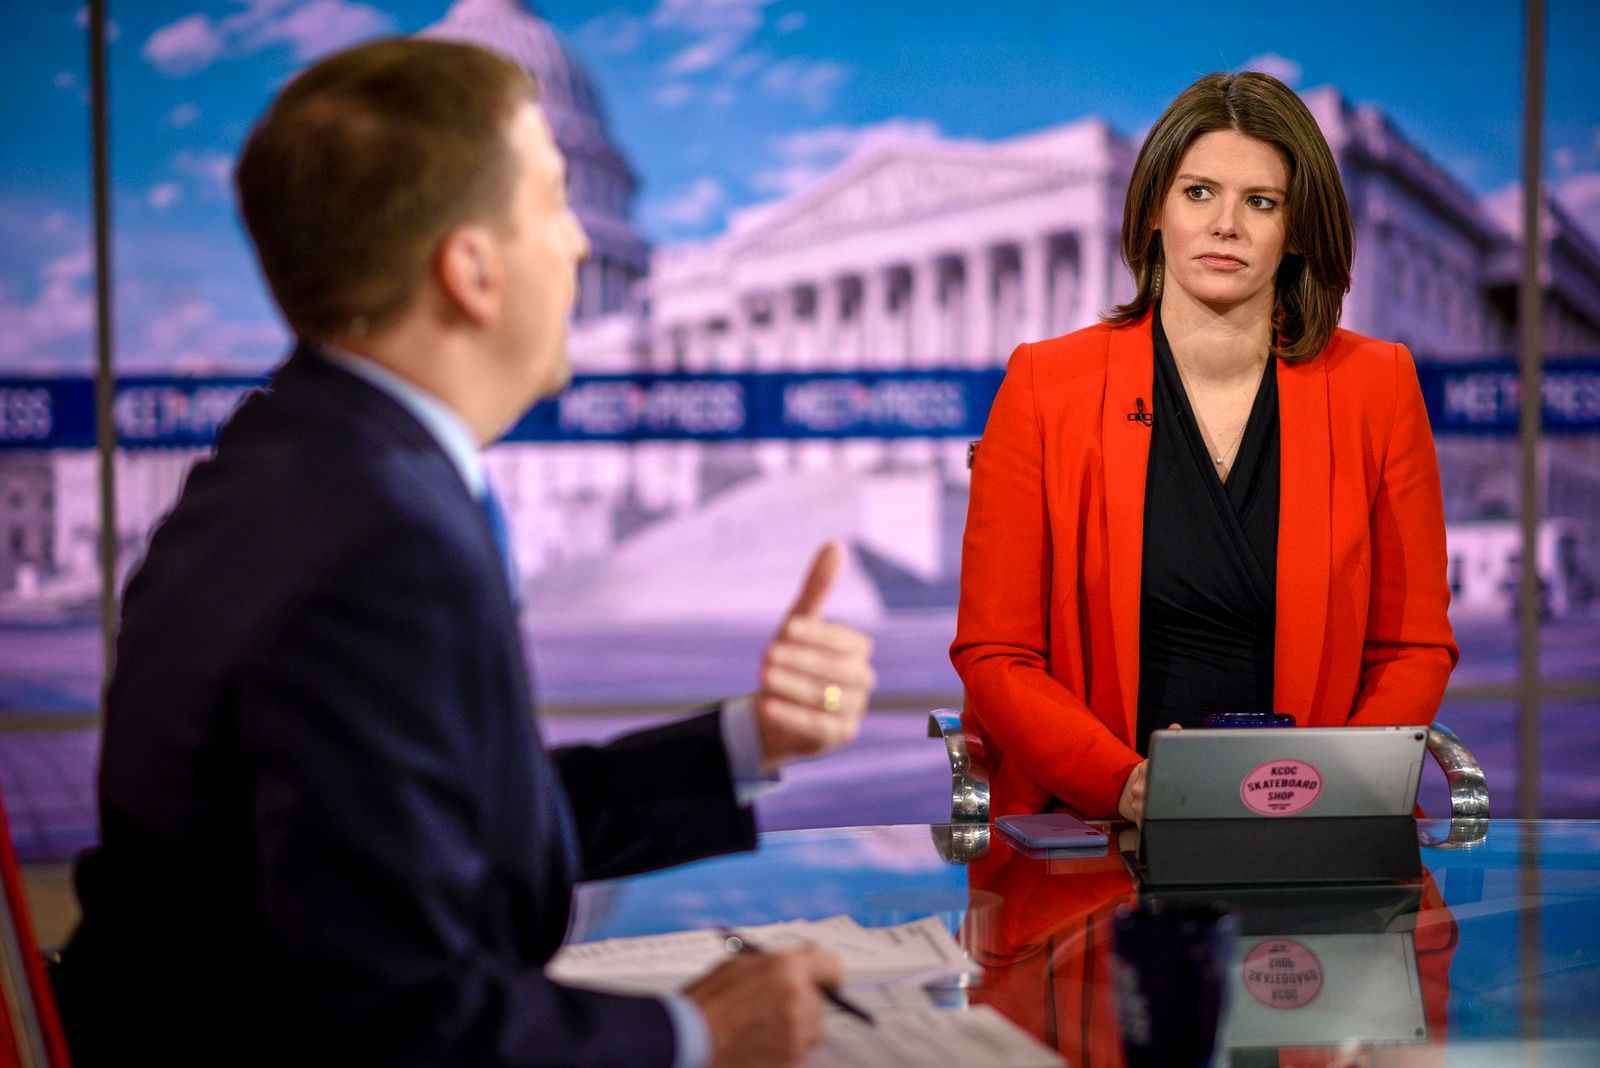 Sen. Mark Warner (D-VA) and moderator Kasie Hunt on "Meet the Press" in Washington, D.C. on March 3, 2019 | Photo: Getty Images/William B. Plowman/NBC Newswire/NBCUniversal